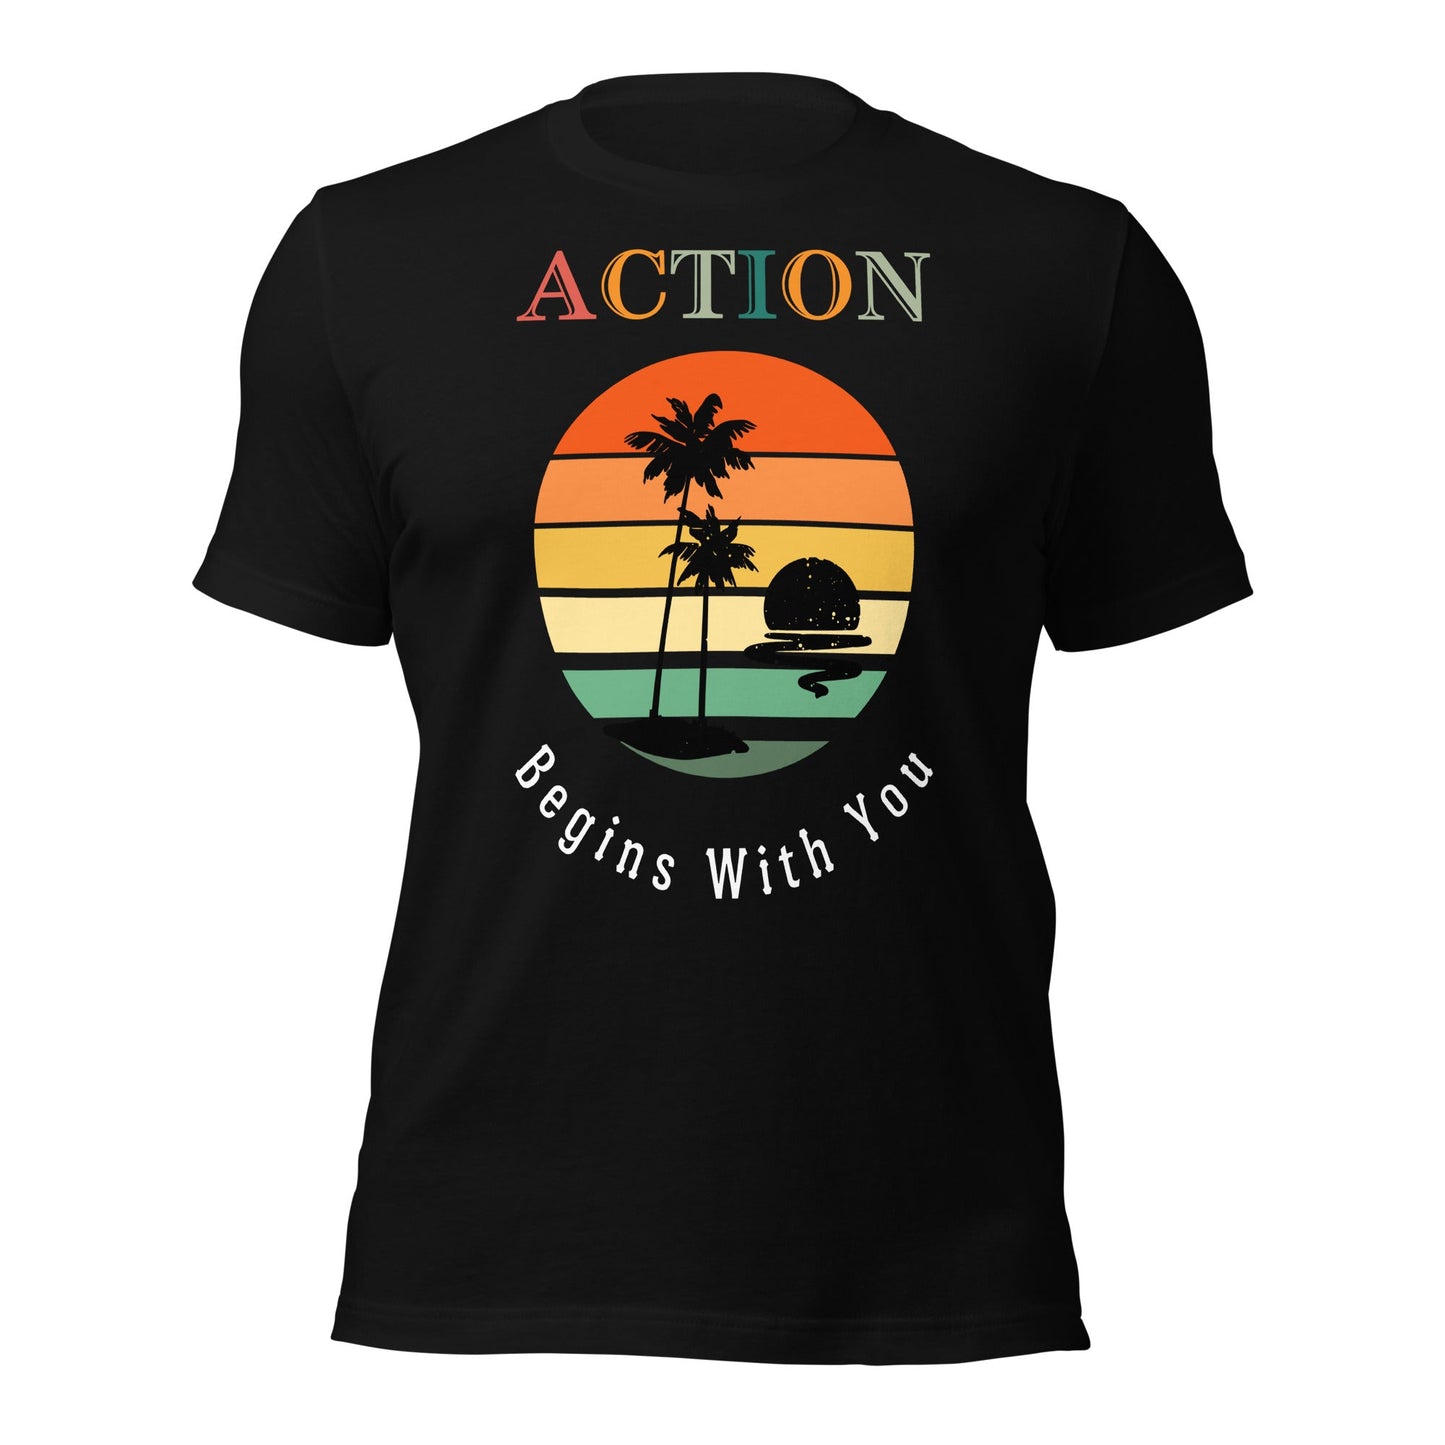 Action Begins With You Motivational T-Shirt - Motivational Wonders